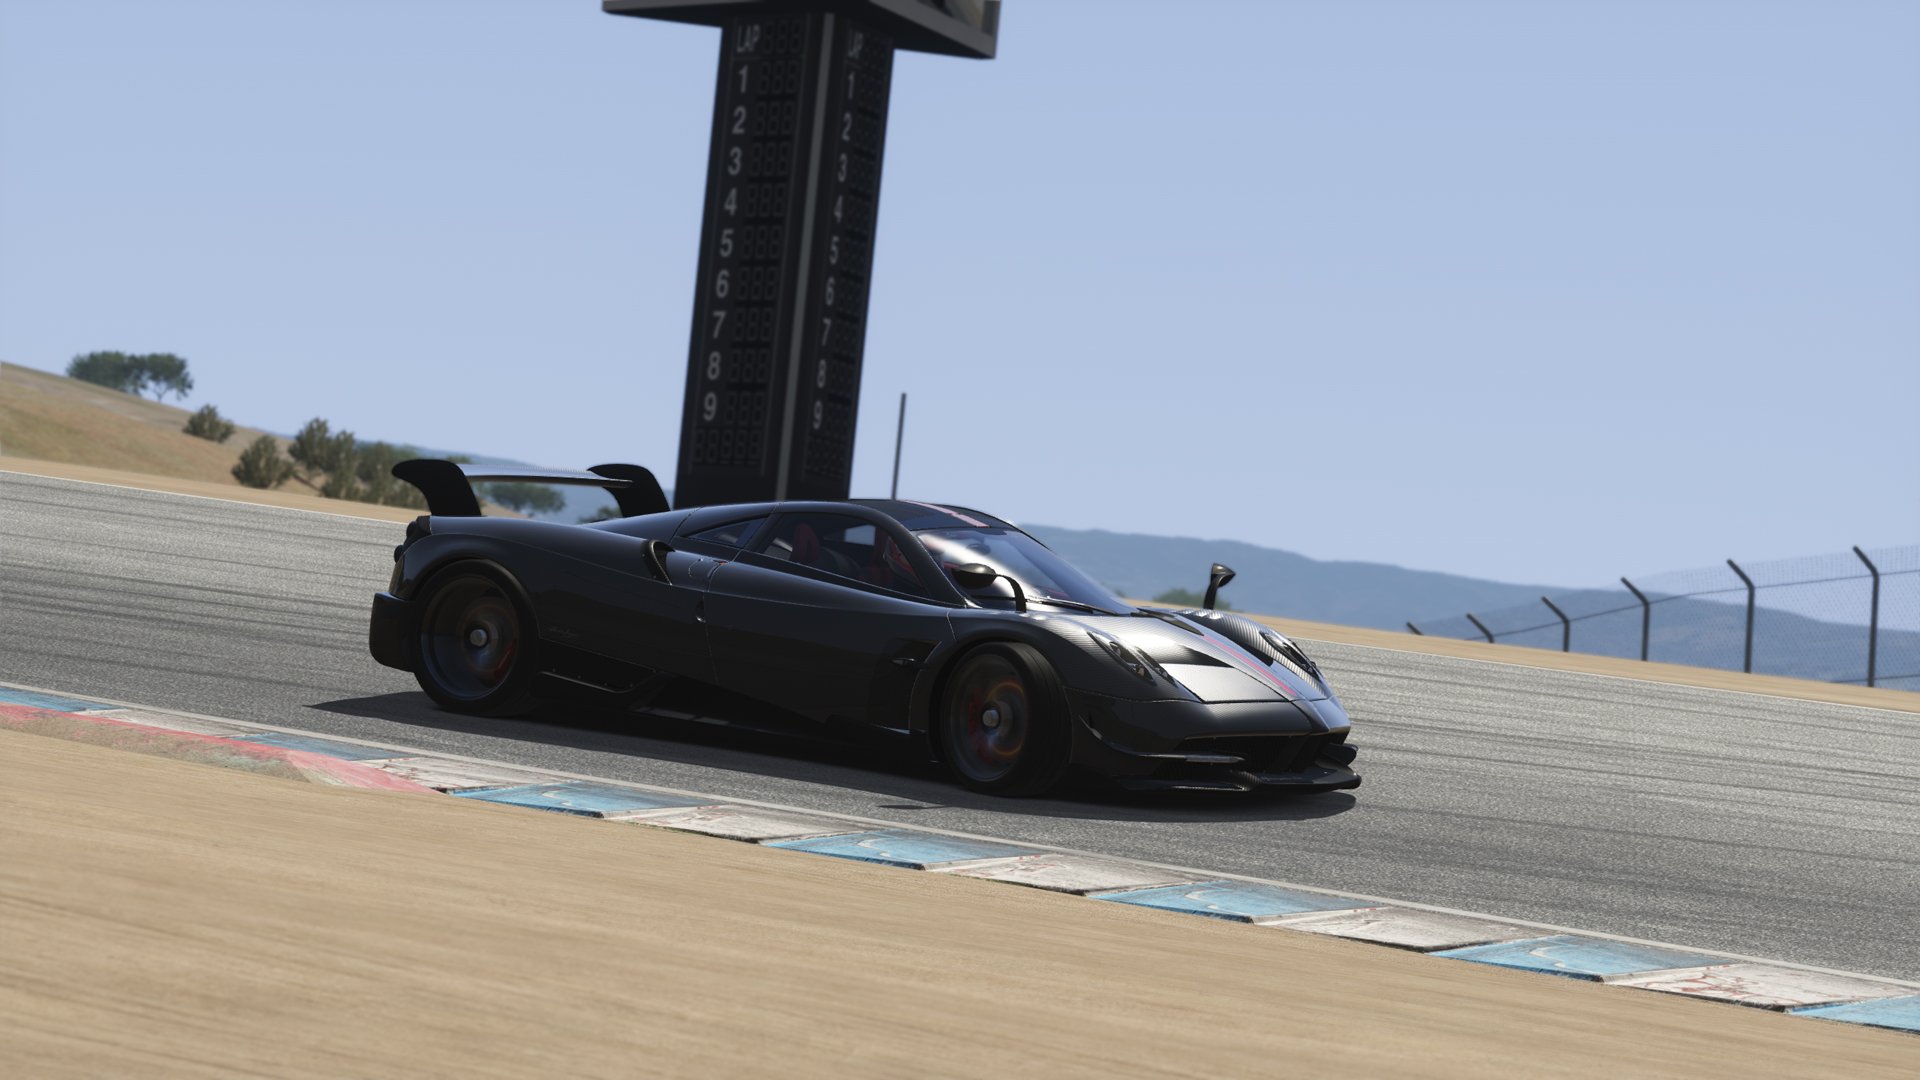 Assetto Corsa Ultimate Edition Includes All Updates And 8 DLC PacKs Ps4